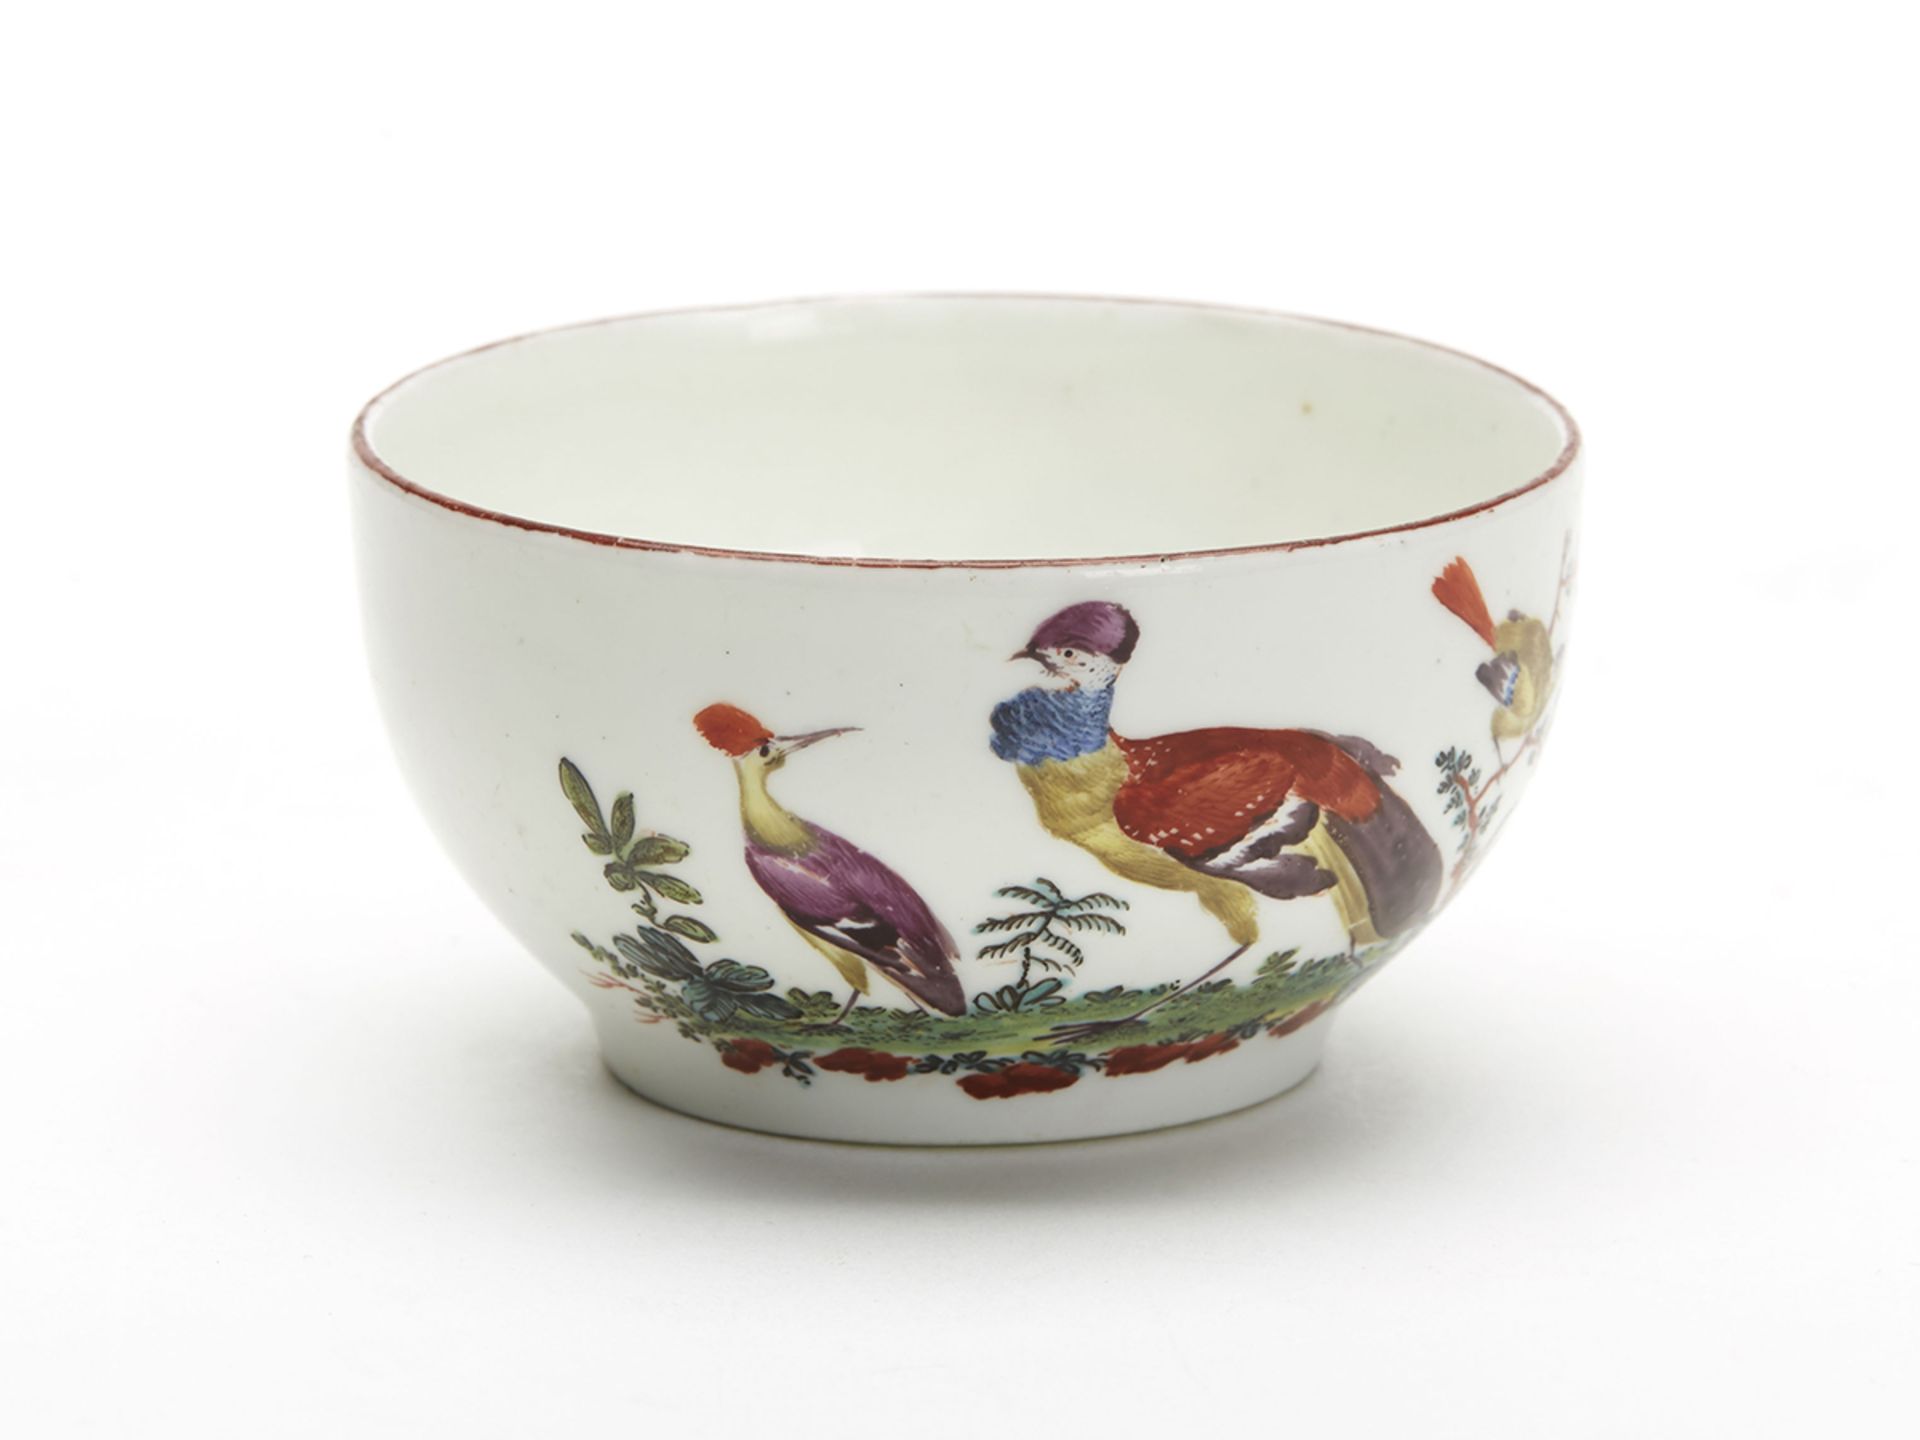 ANTIQUE EARLY CHELSEA BIRD PAINTED TEABOWL 18TH C.